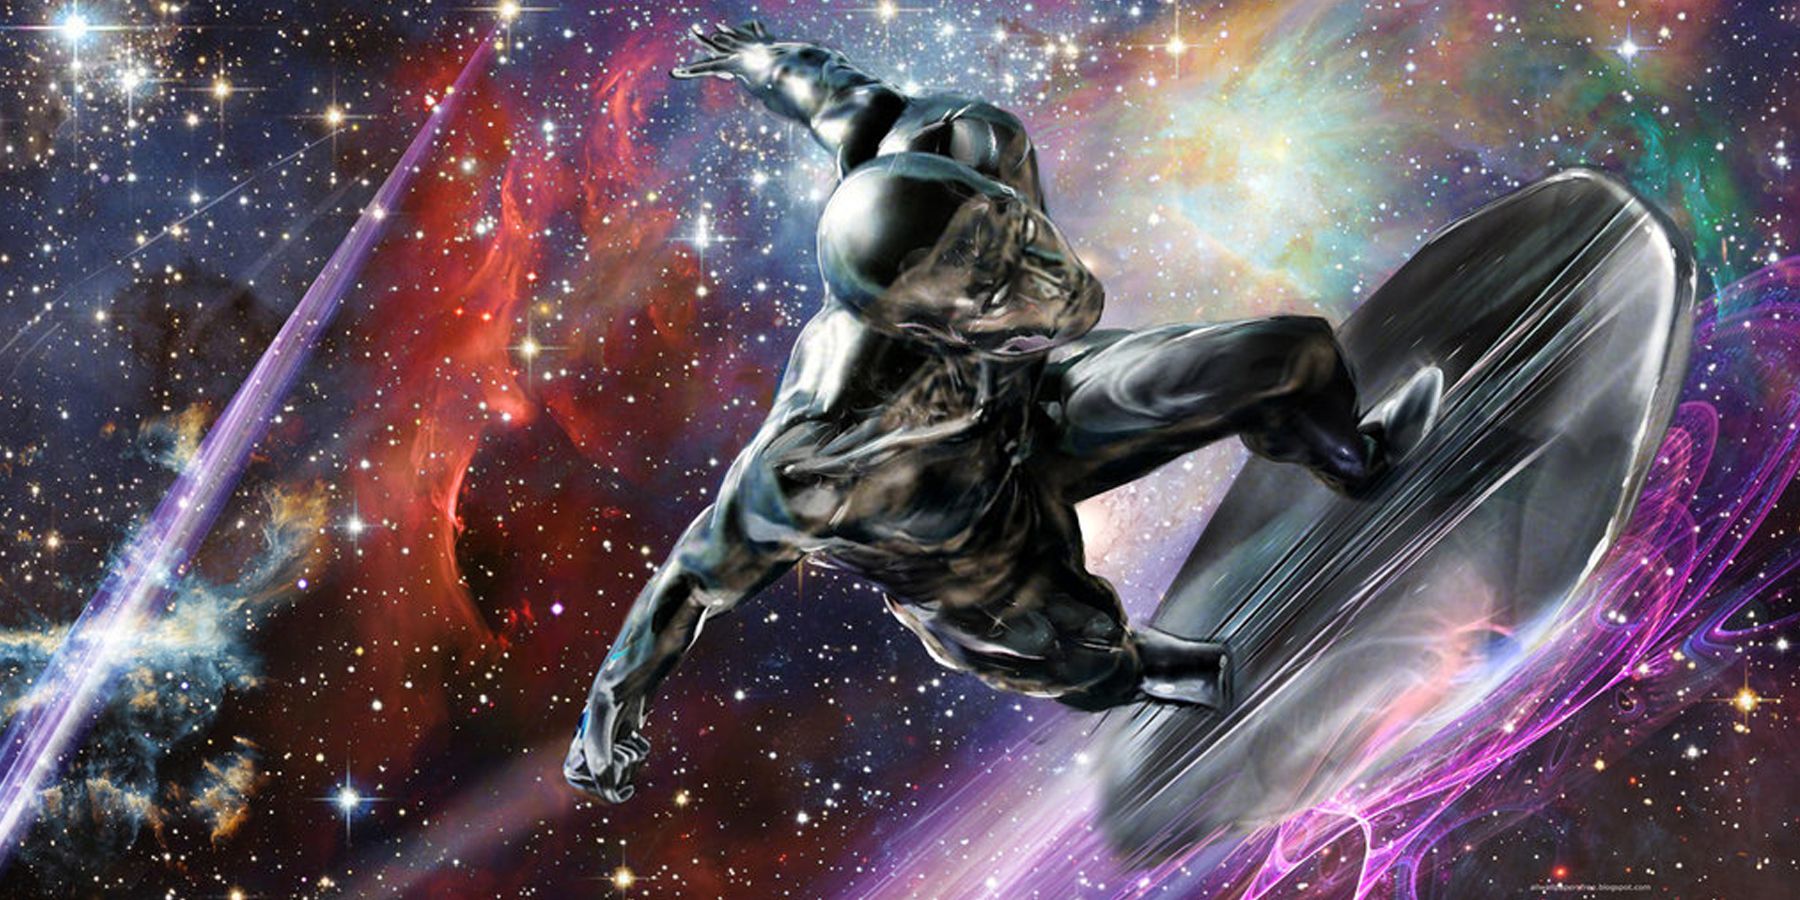 Silver Surfer flies his board through the stars in Marvel Comics